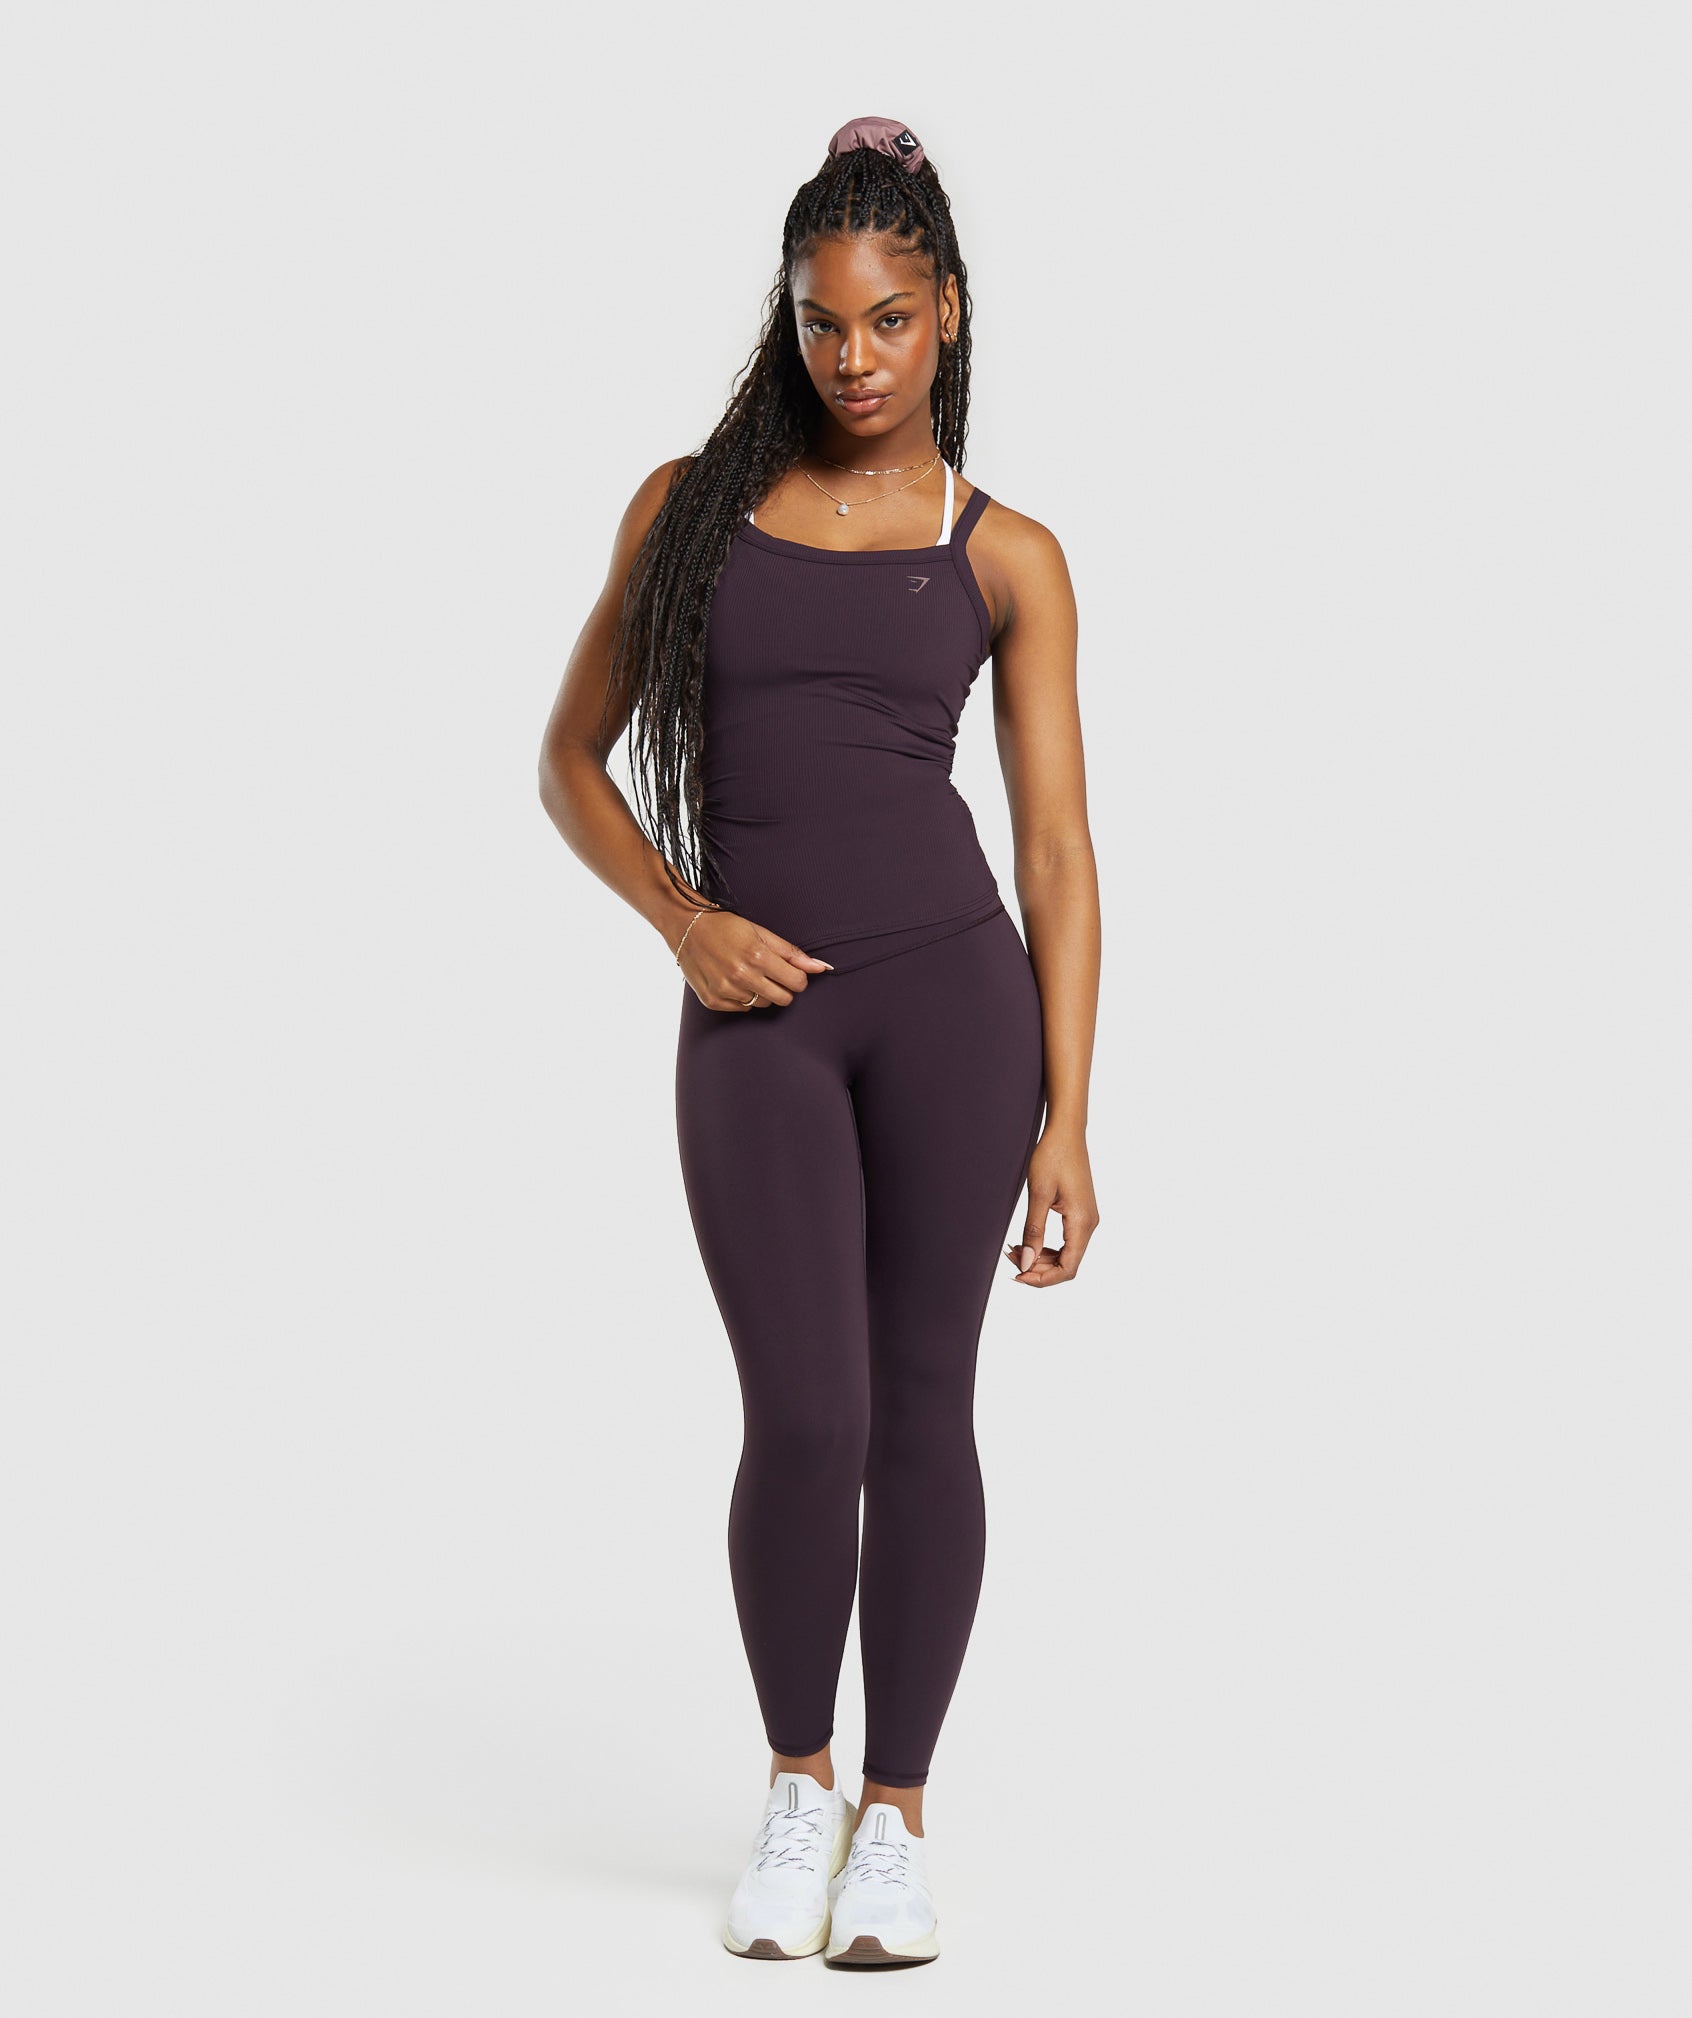 Elevate Ruched Tank in Plum Brown - view 4